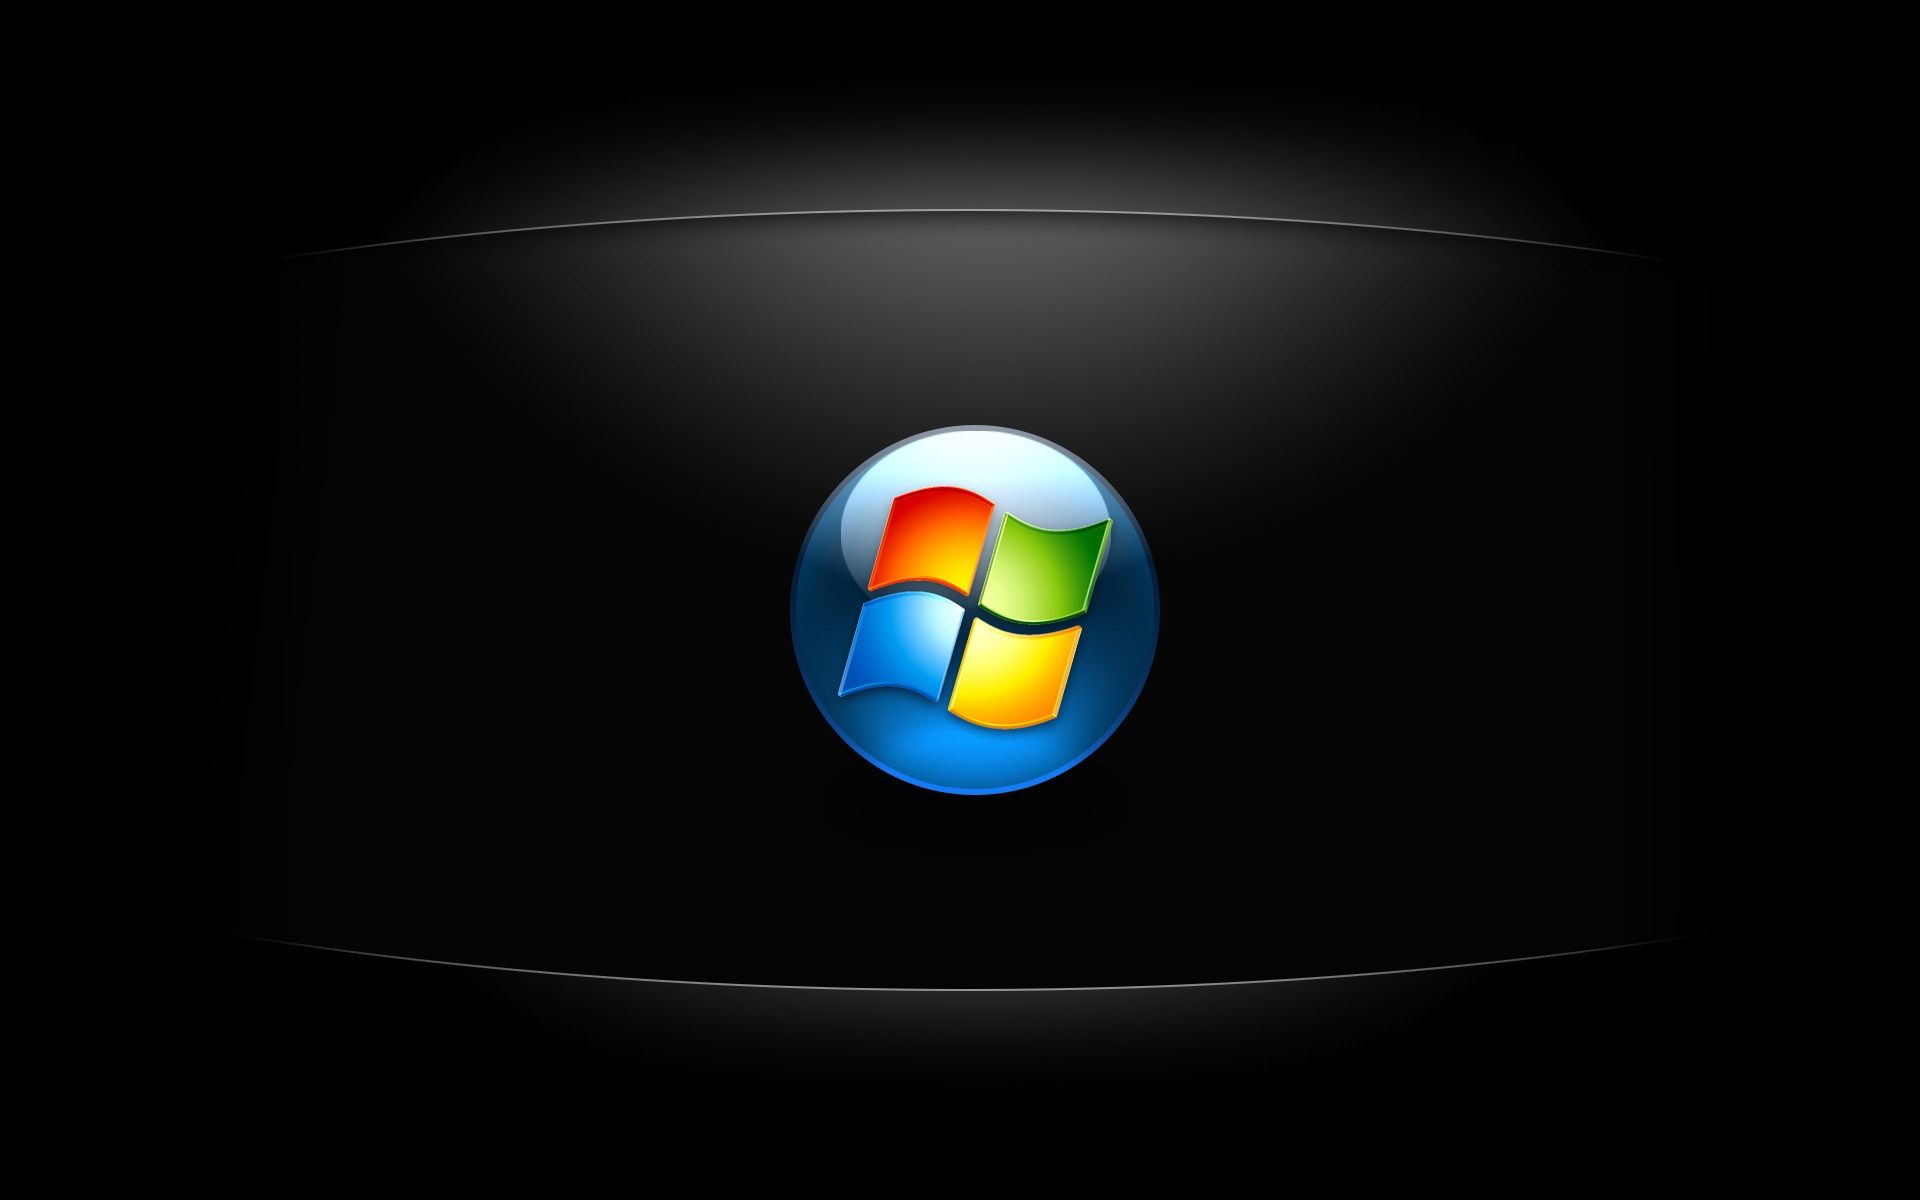 hd desktop wallpapers for windows 7,logo,operating system,font,graphics,technology